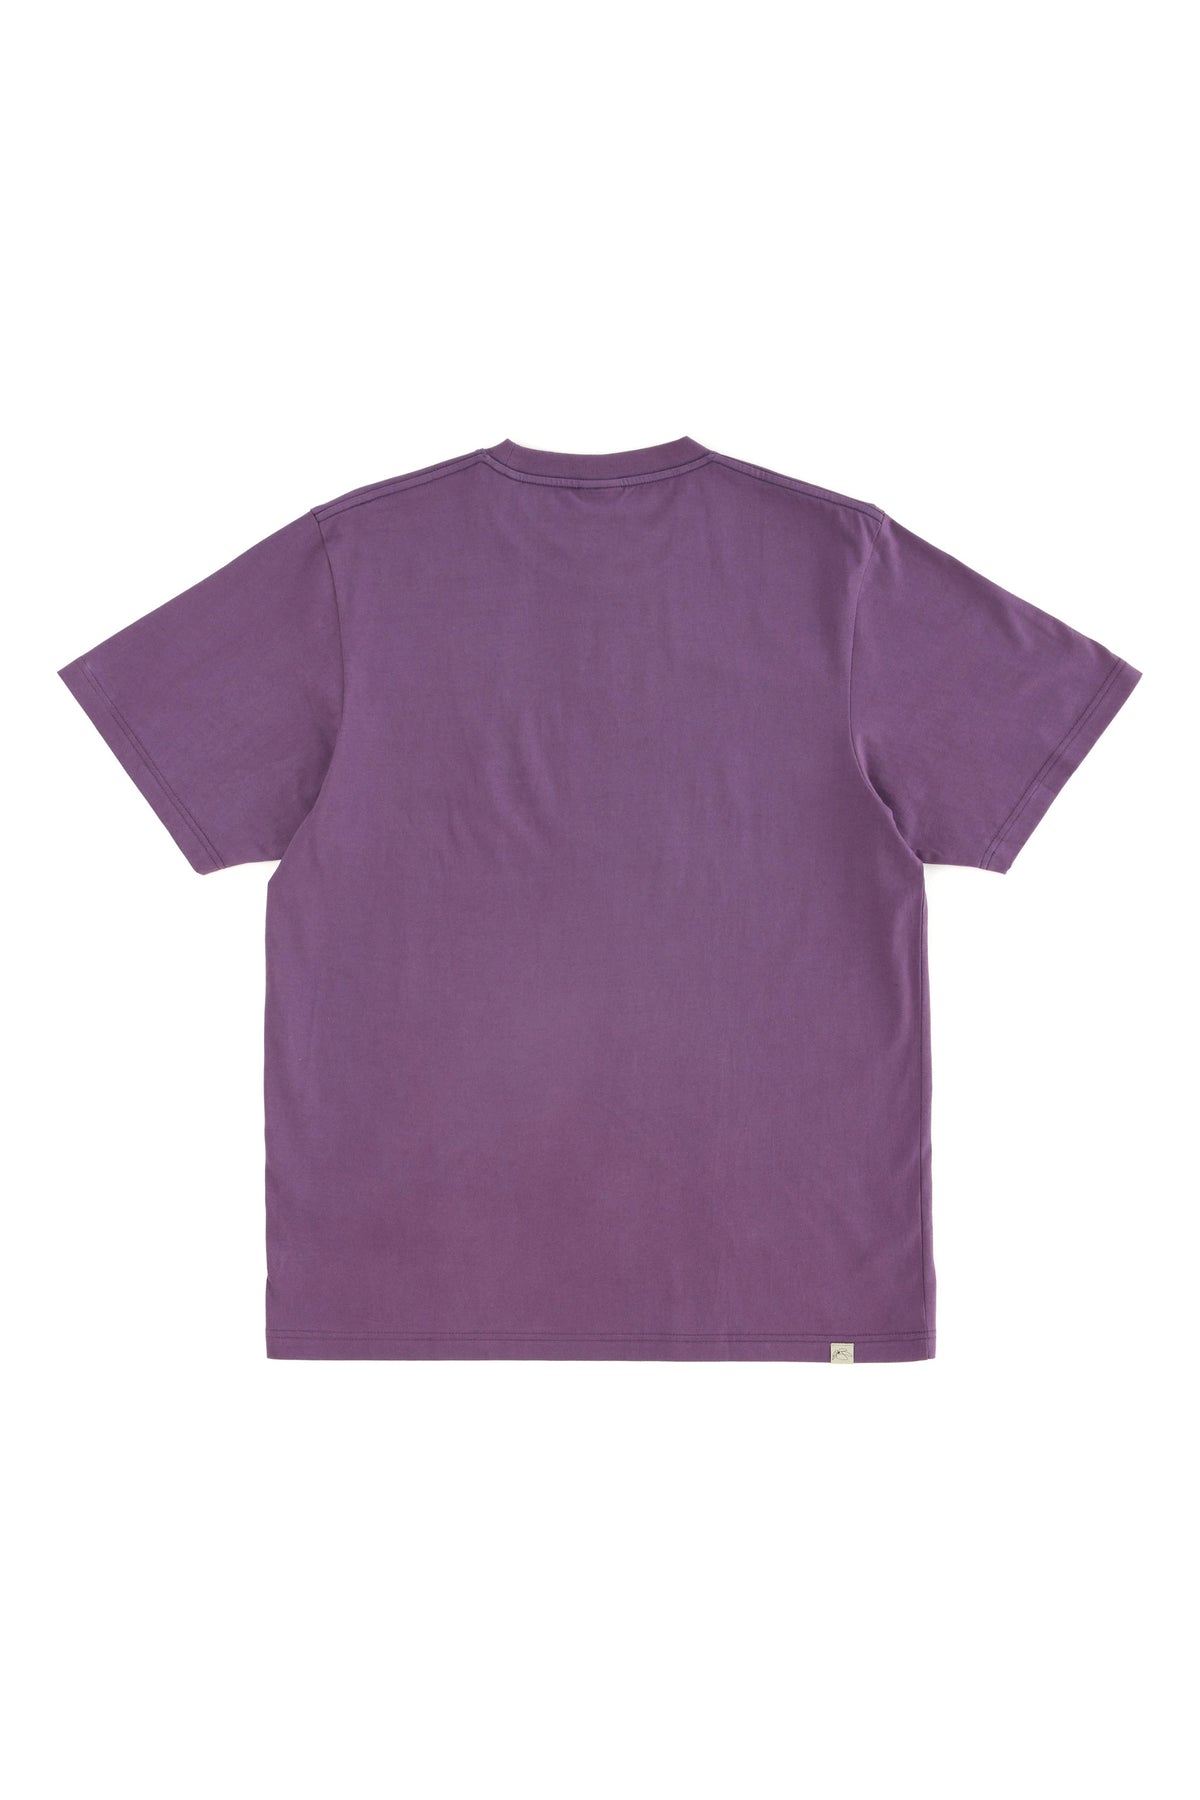 P.A.M. P.World Ecstacy Tee - Mulberry